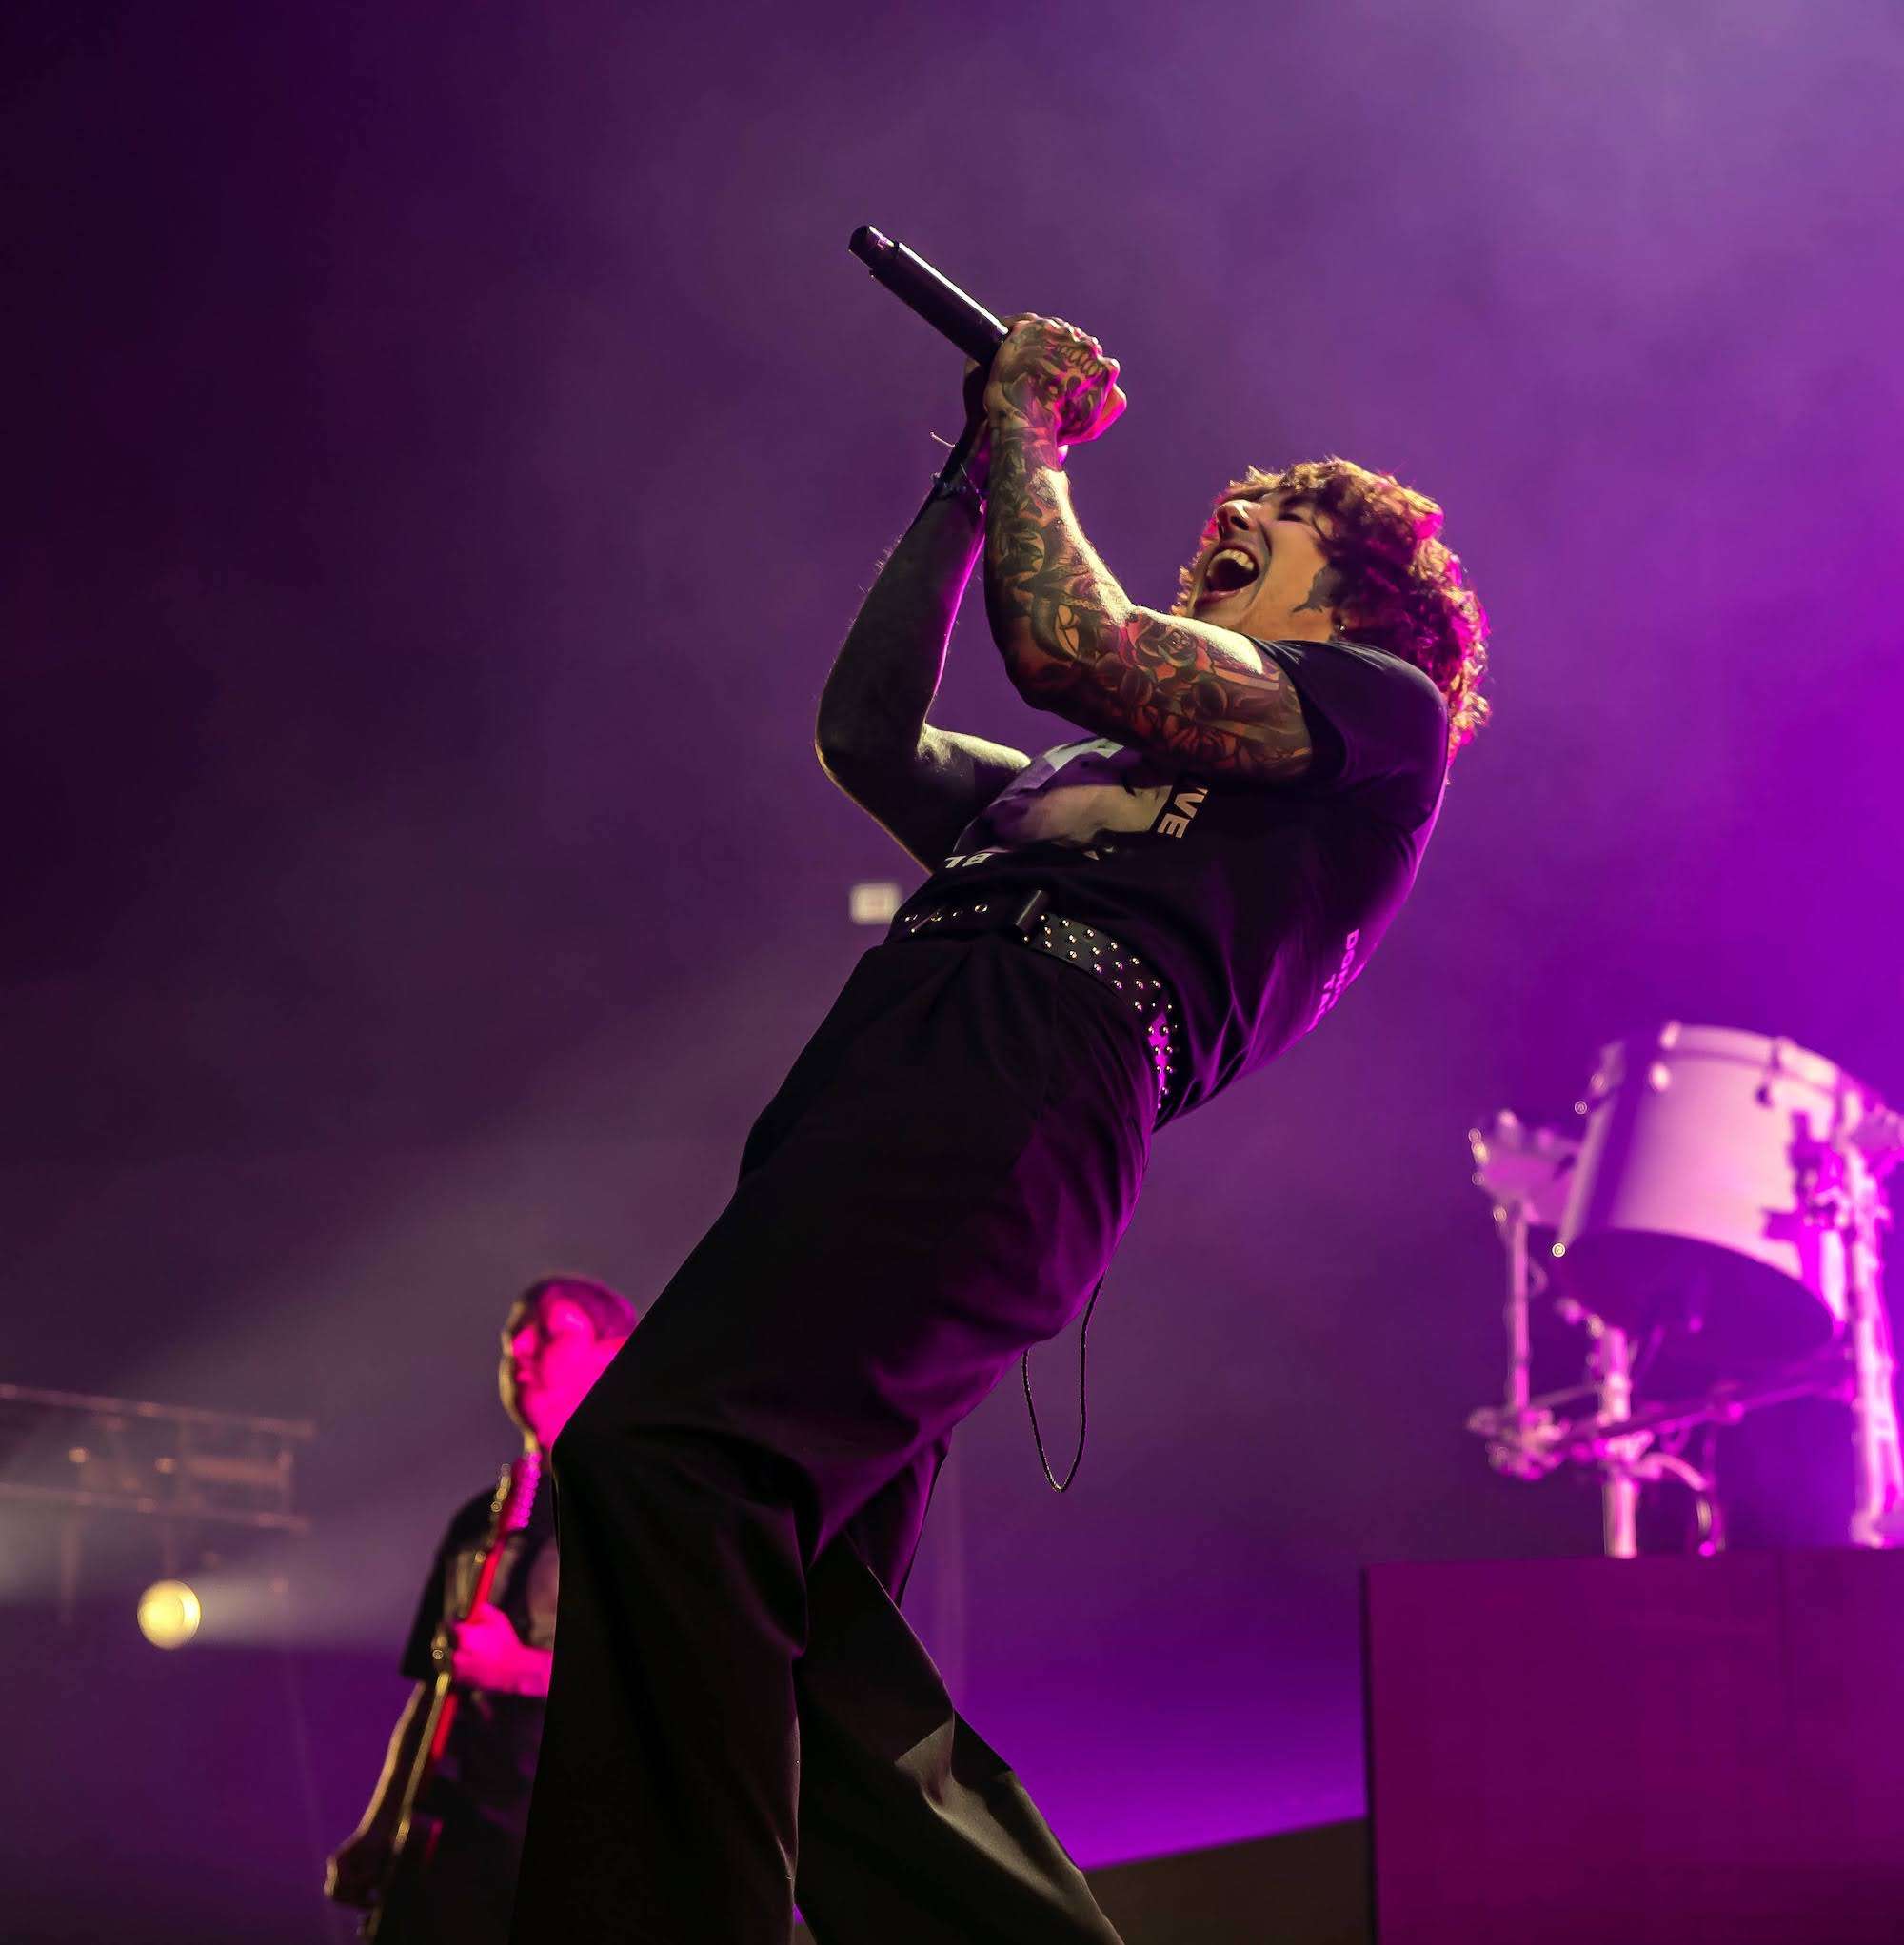 Bring Me the Horizon Live at Wintrust Arena [GALLERY] 11